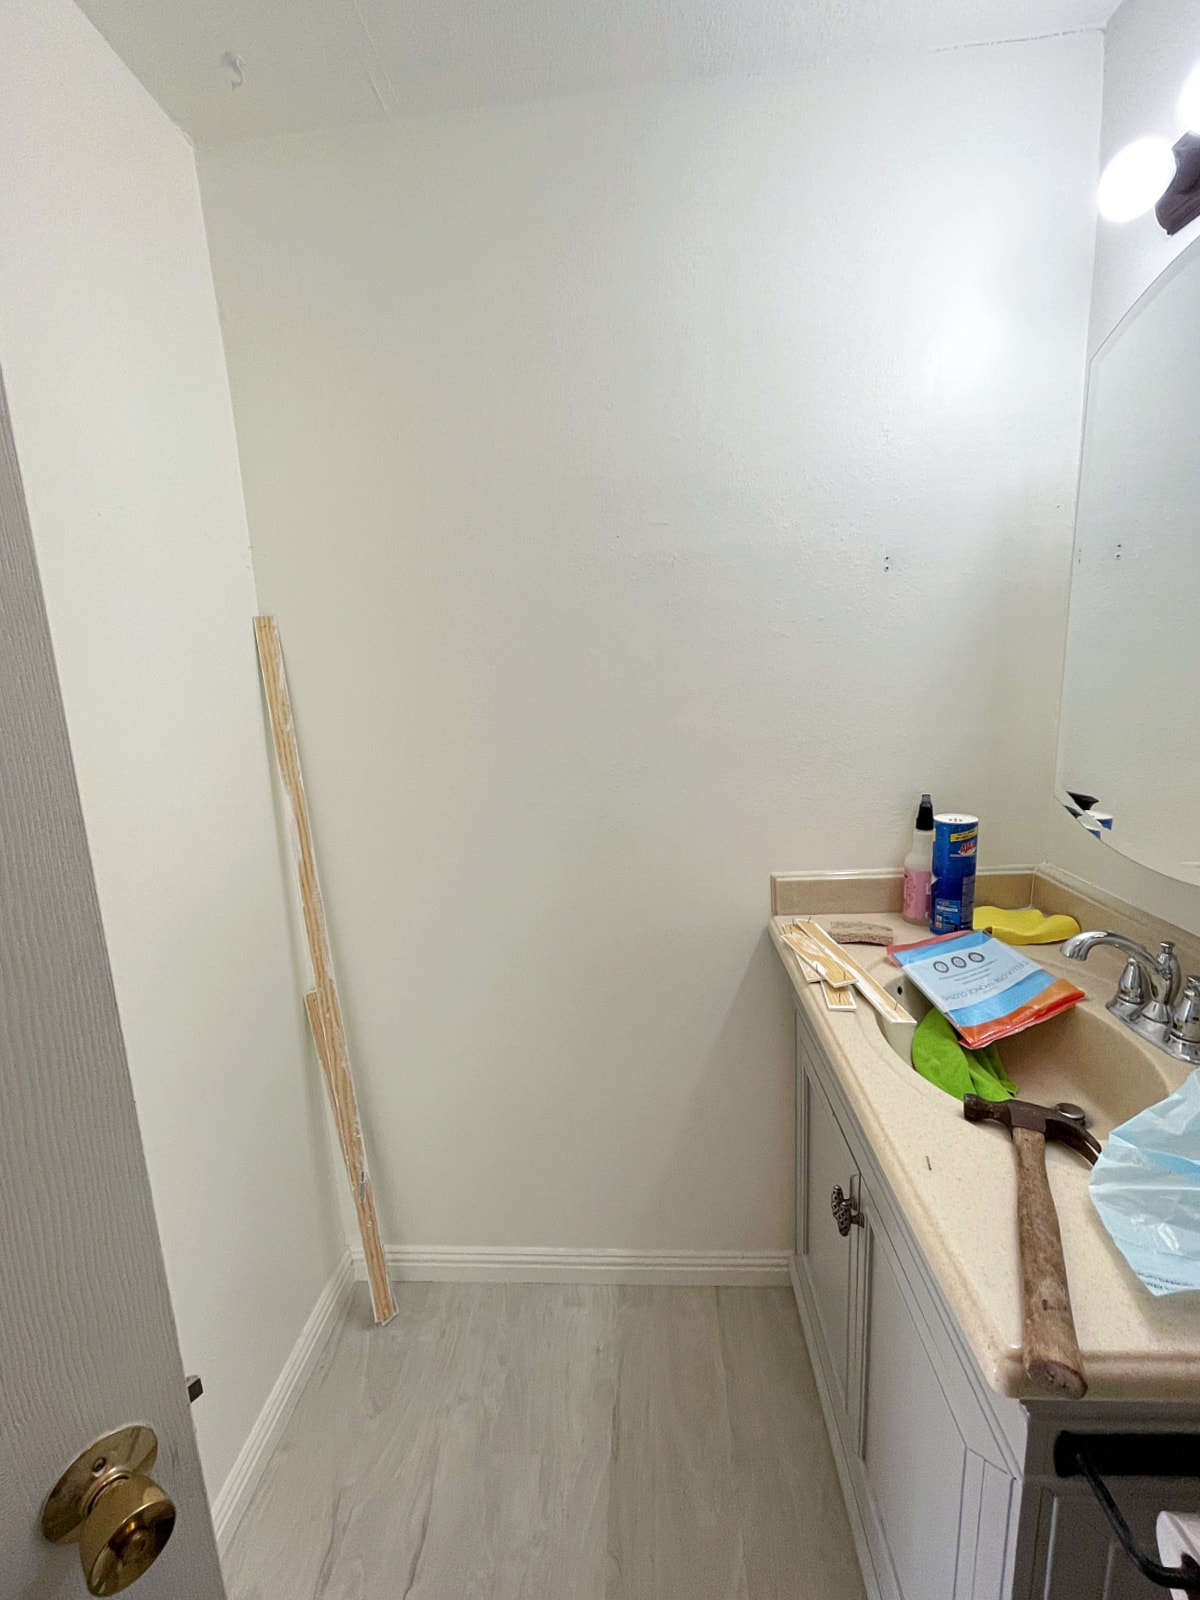 bathroom with blank wall and counter with cleaning and construction tools